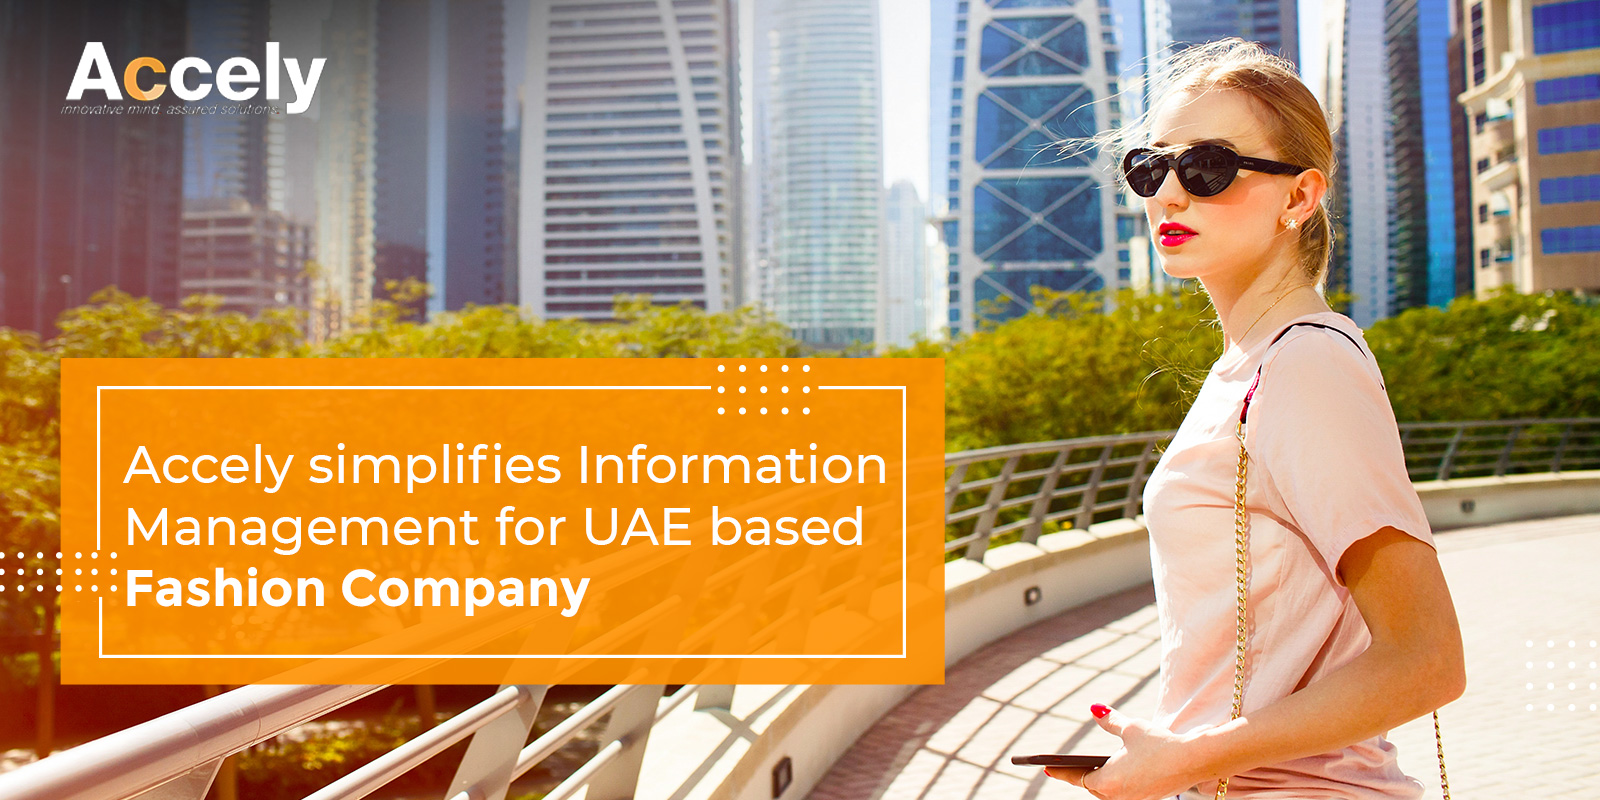 Accely simplifies Information Management for UAE based Fashion Company